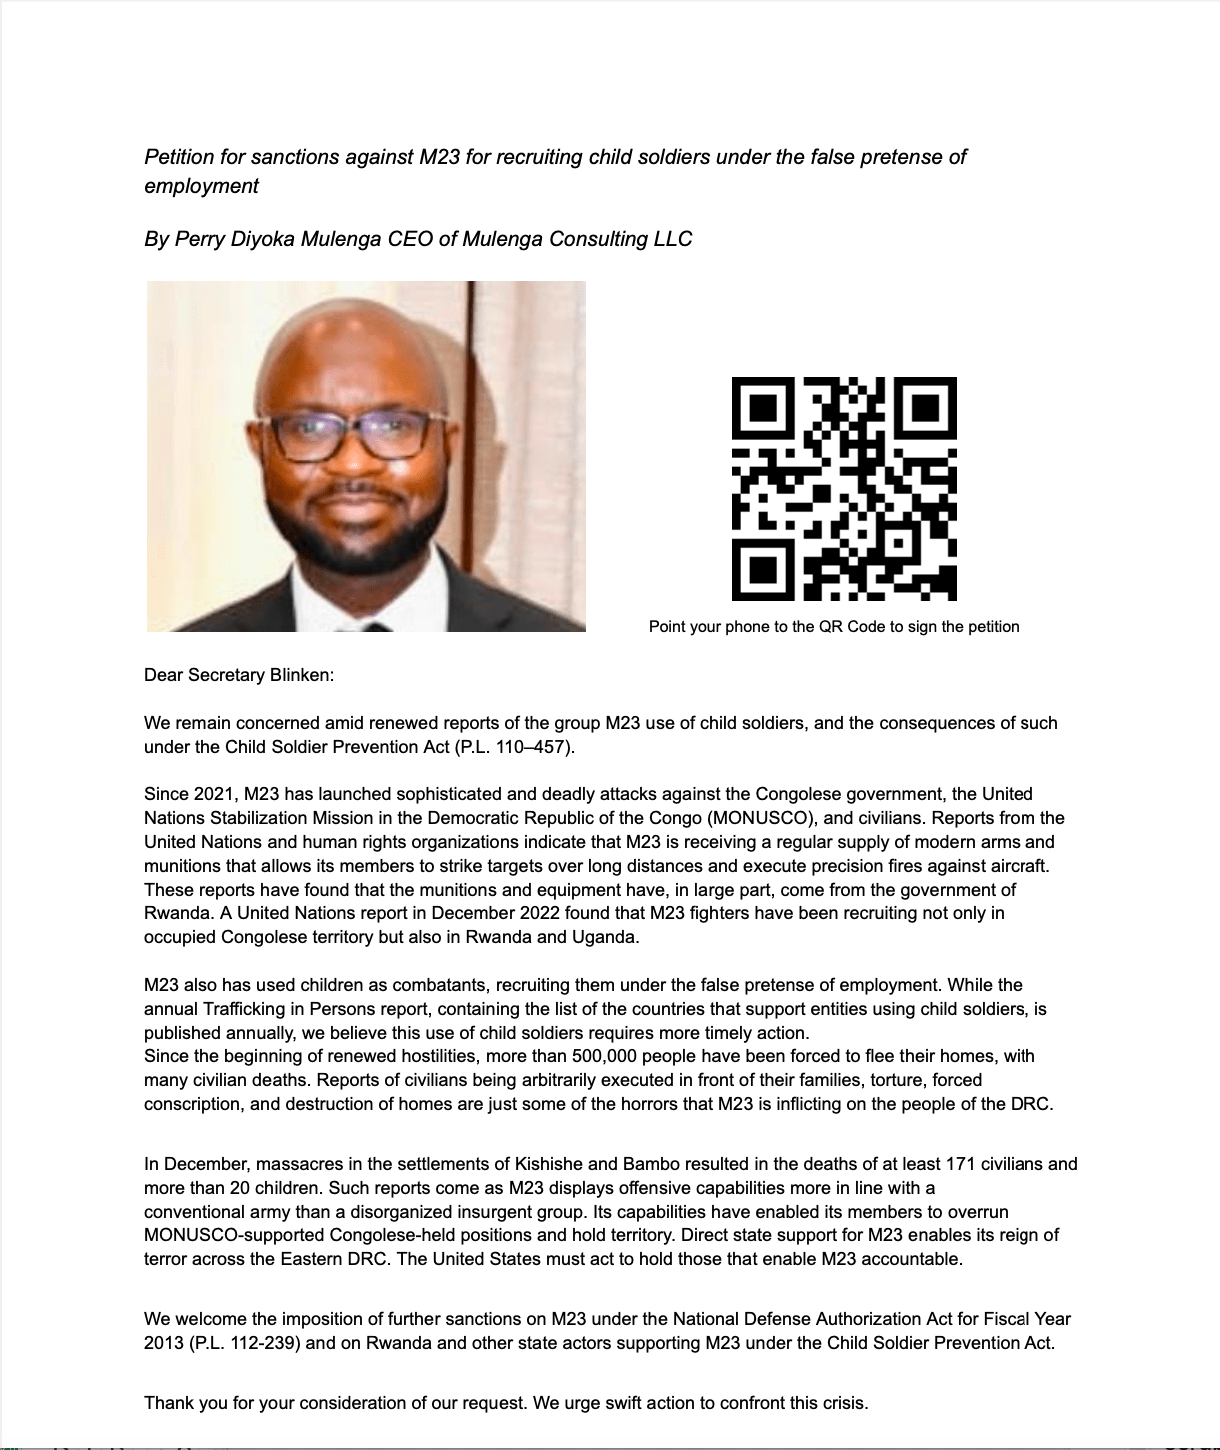 Addressing the Humanitarian Crisis in the Democratic Republic of Congo (DRC): Mulenga Consulting’s CEO Perry Diyoka Mulenga Leads Global Petition to Counter M23’s Child Soldier Exploitation